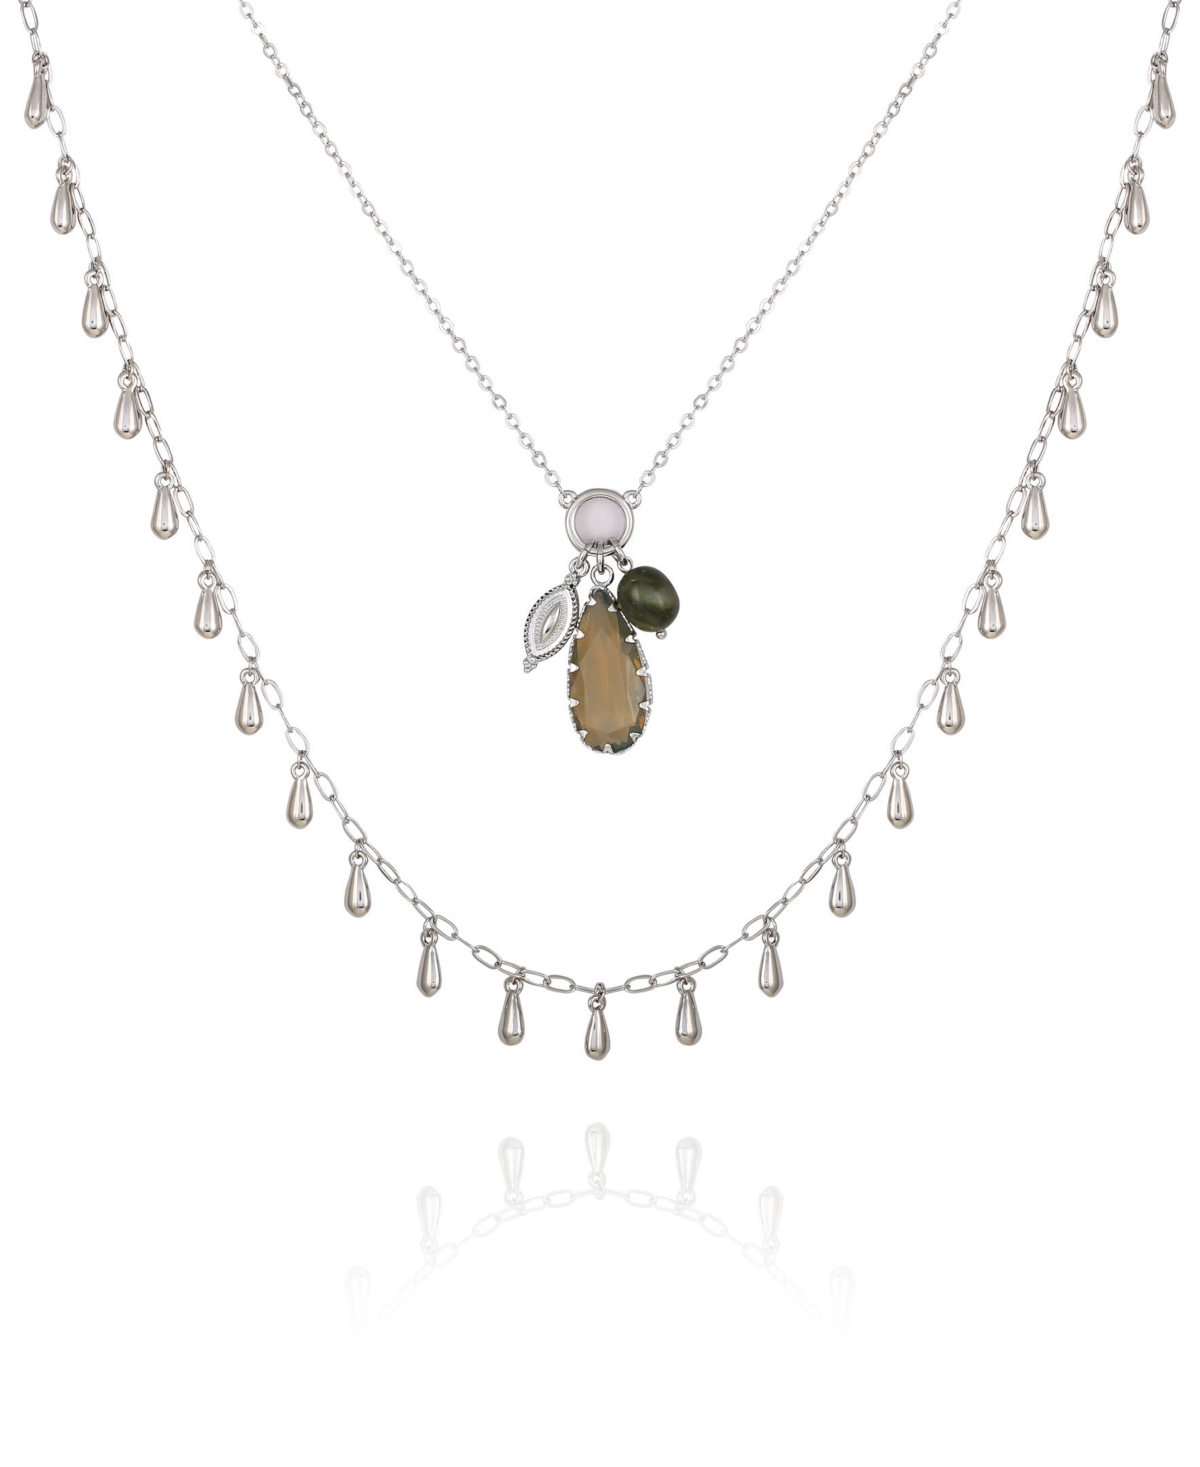 Gypsy Revival Layered Necklace - Silver-Tone